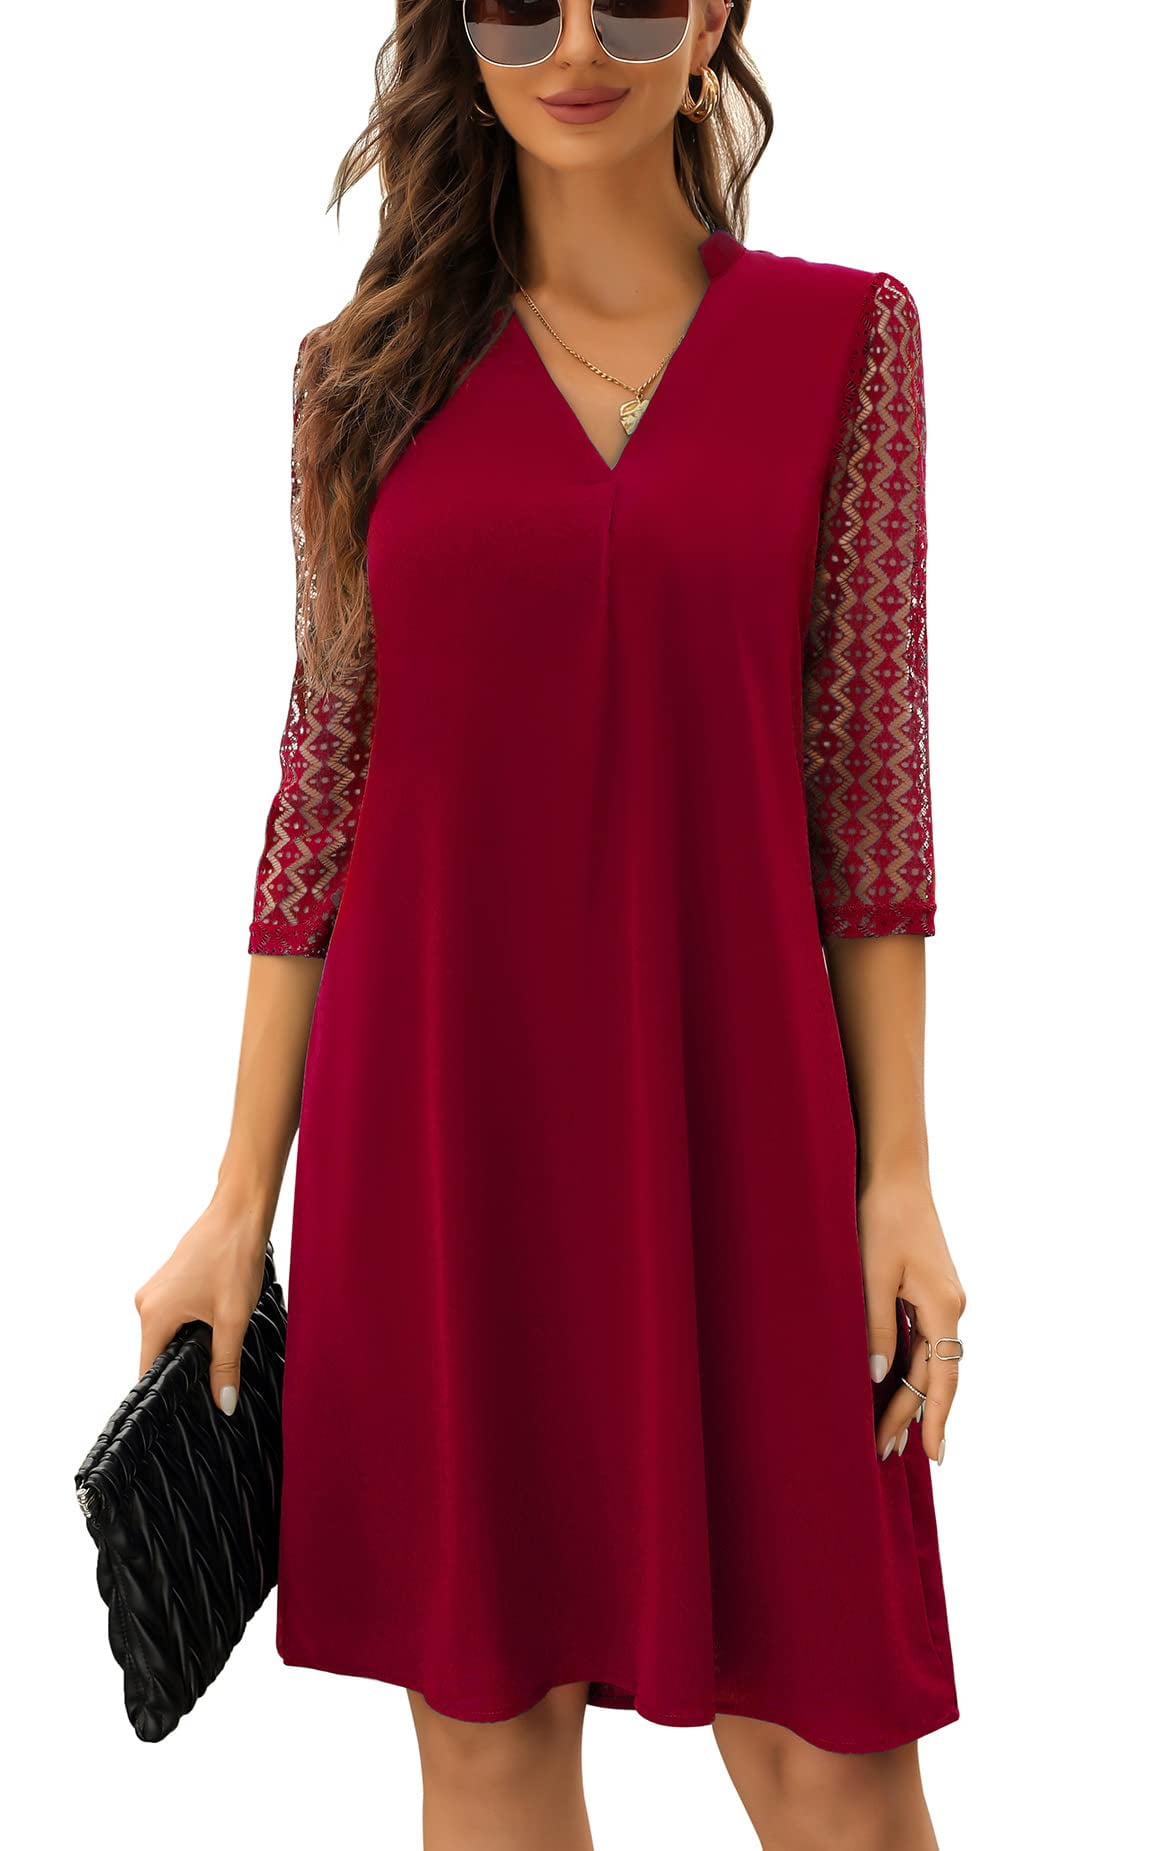 Dress 3/4 V Oyang Lace Tunic Dress Loose Women\'s Casual Neck Sleeve Shift Dresses Work Office